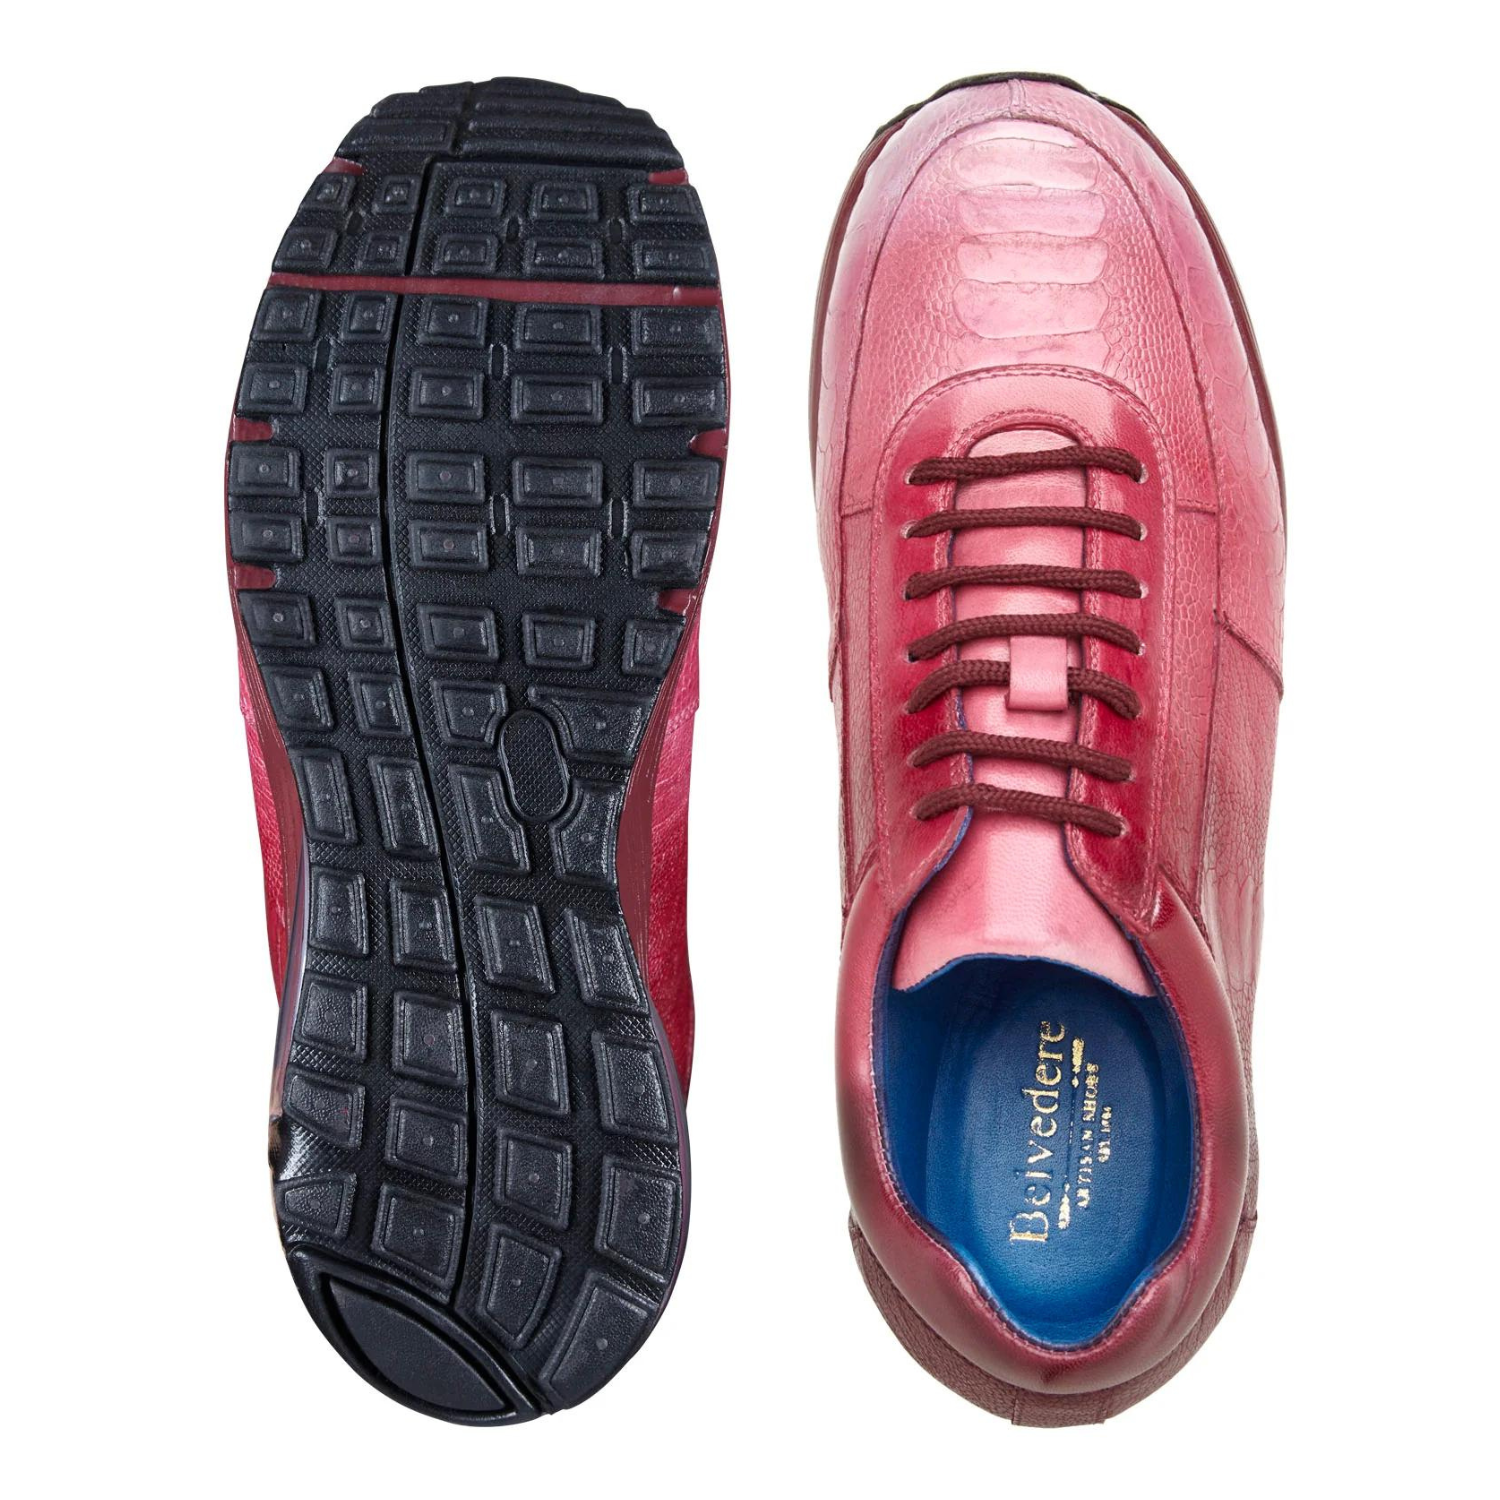 Genuine Ostrich Leather Athletic Fashion Shoes in Multi Rose – Suits & More